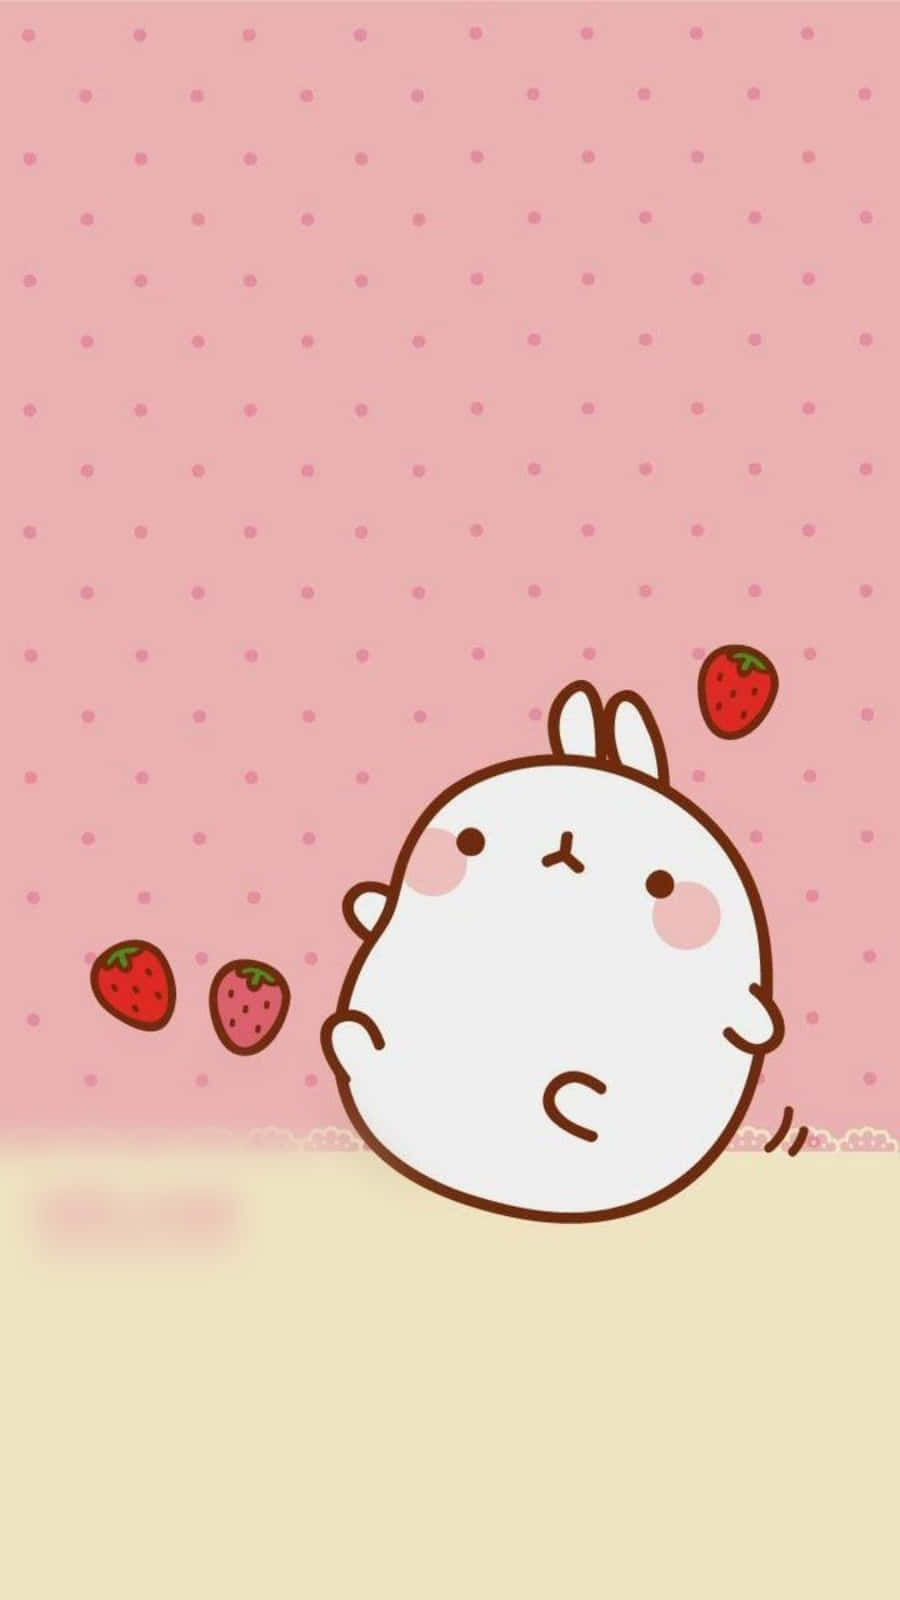 A cute white rabbit with strawberries - Molang